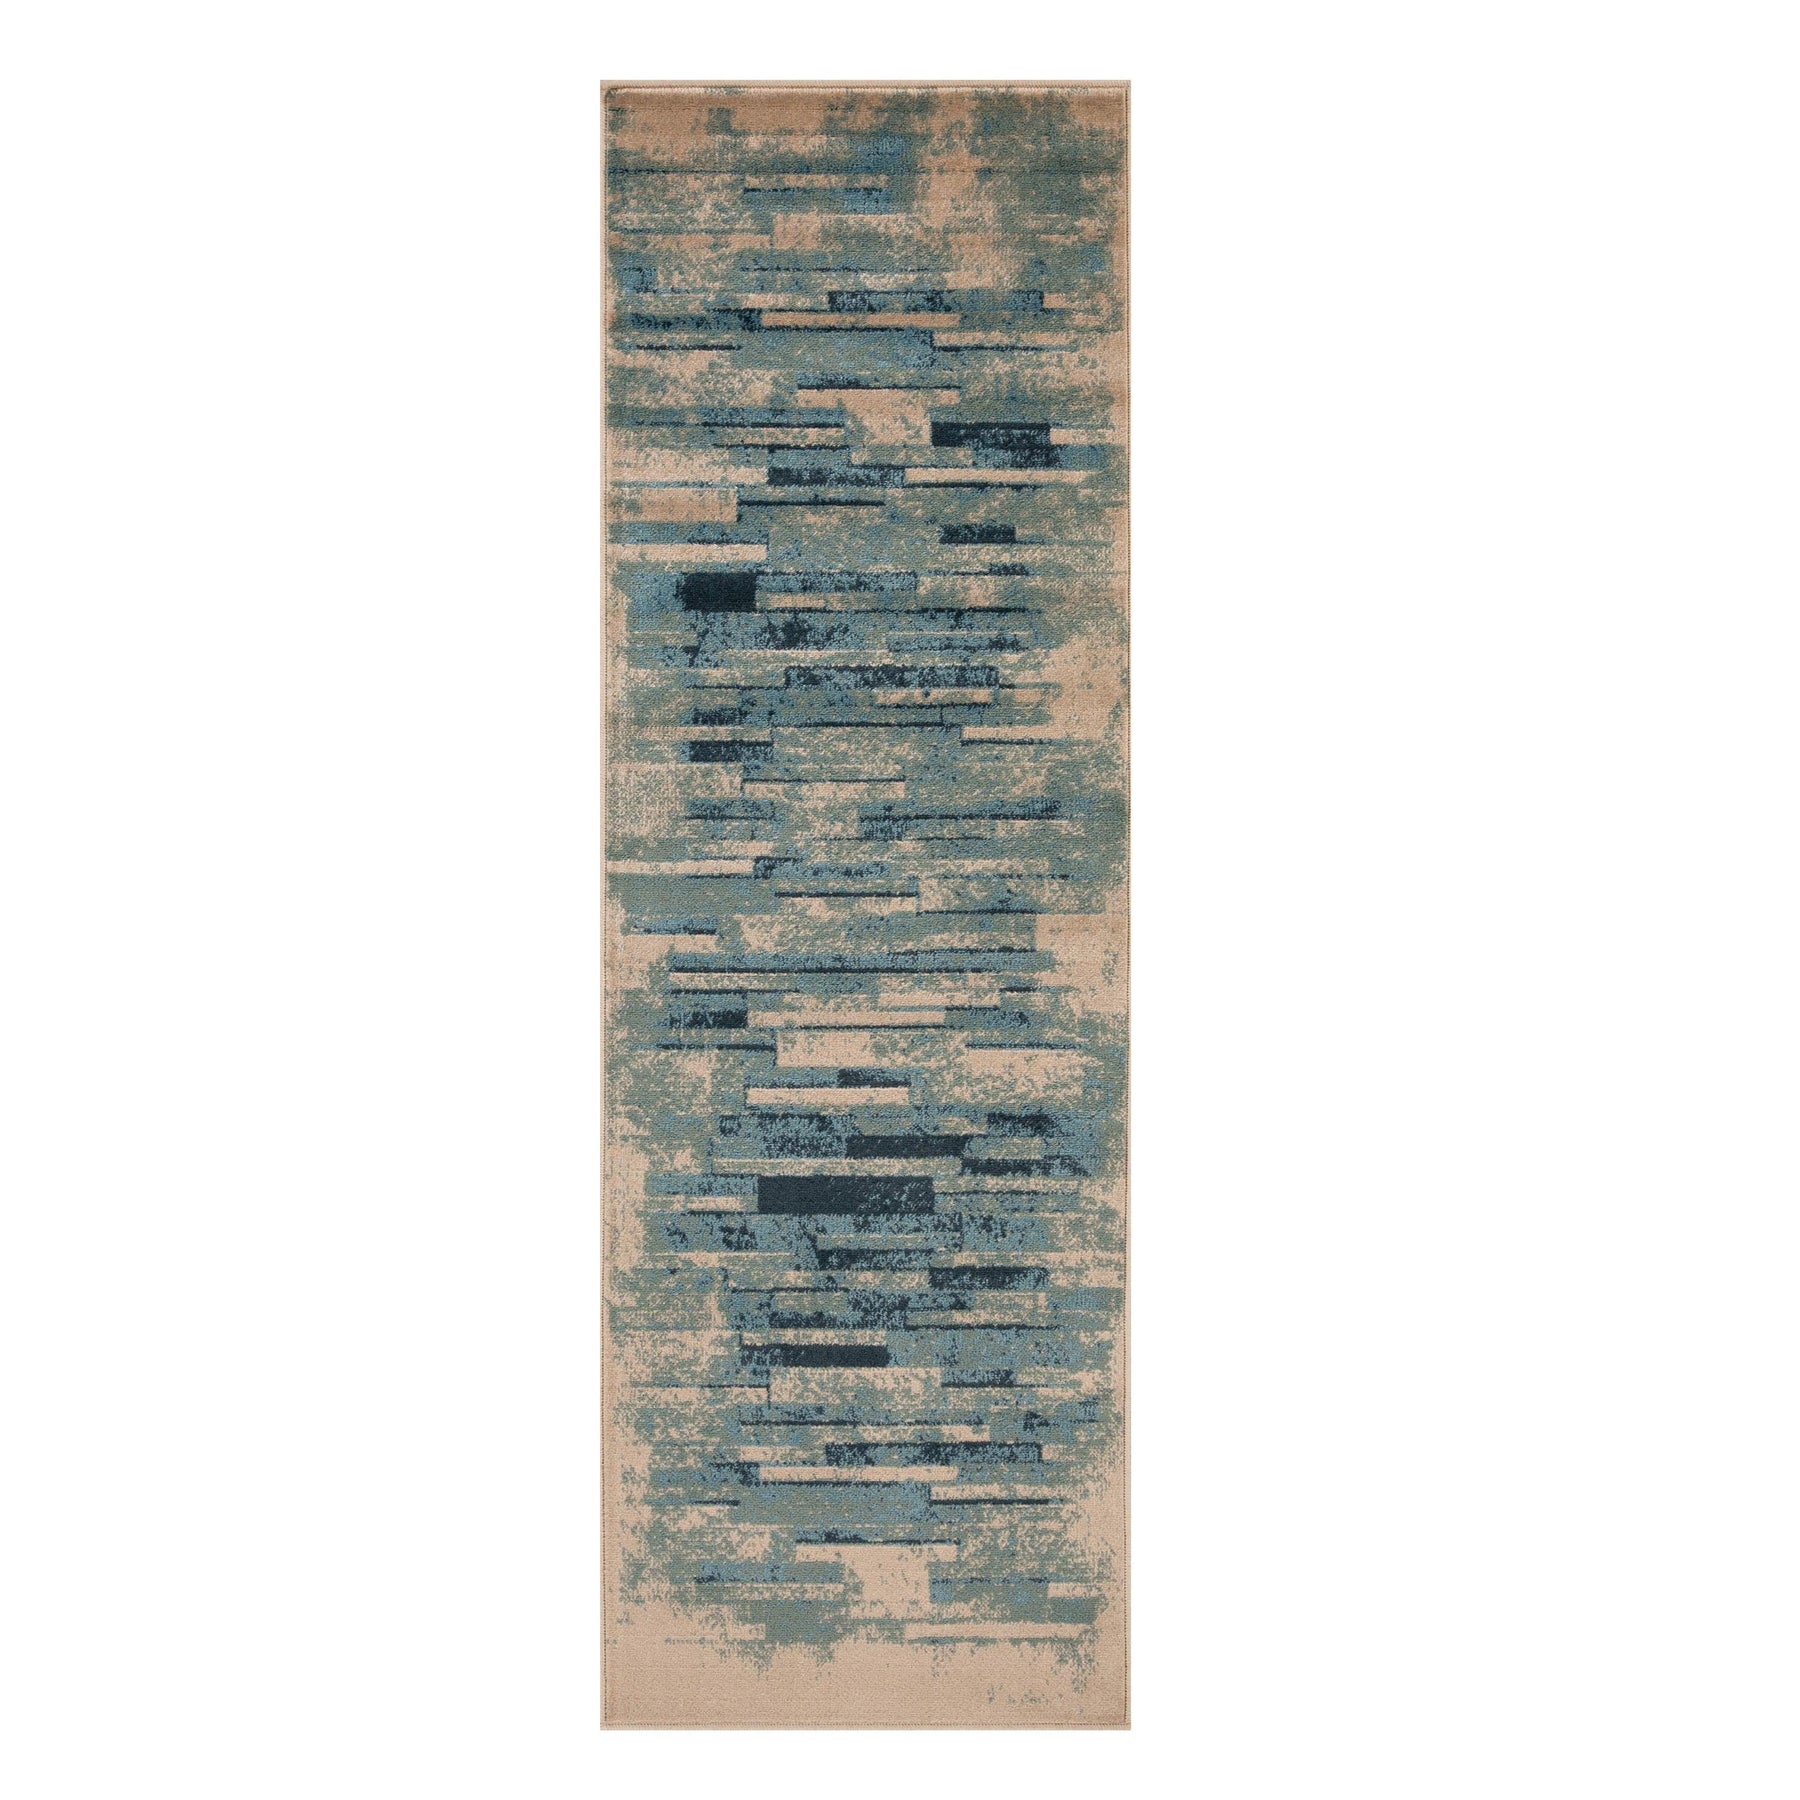 Abstract Graphic Design Indoor Area Rug or Runner - Blue